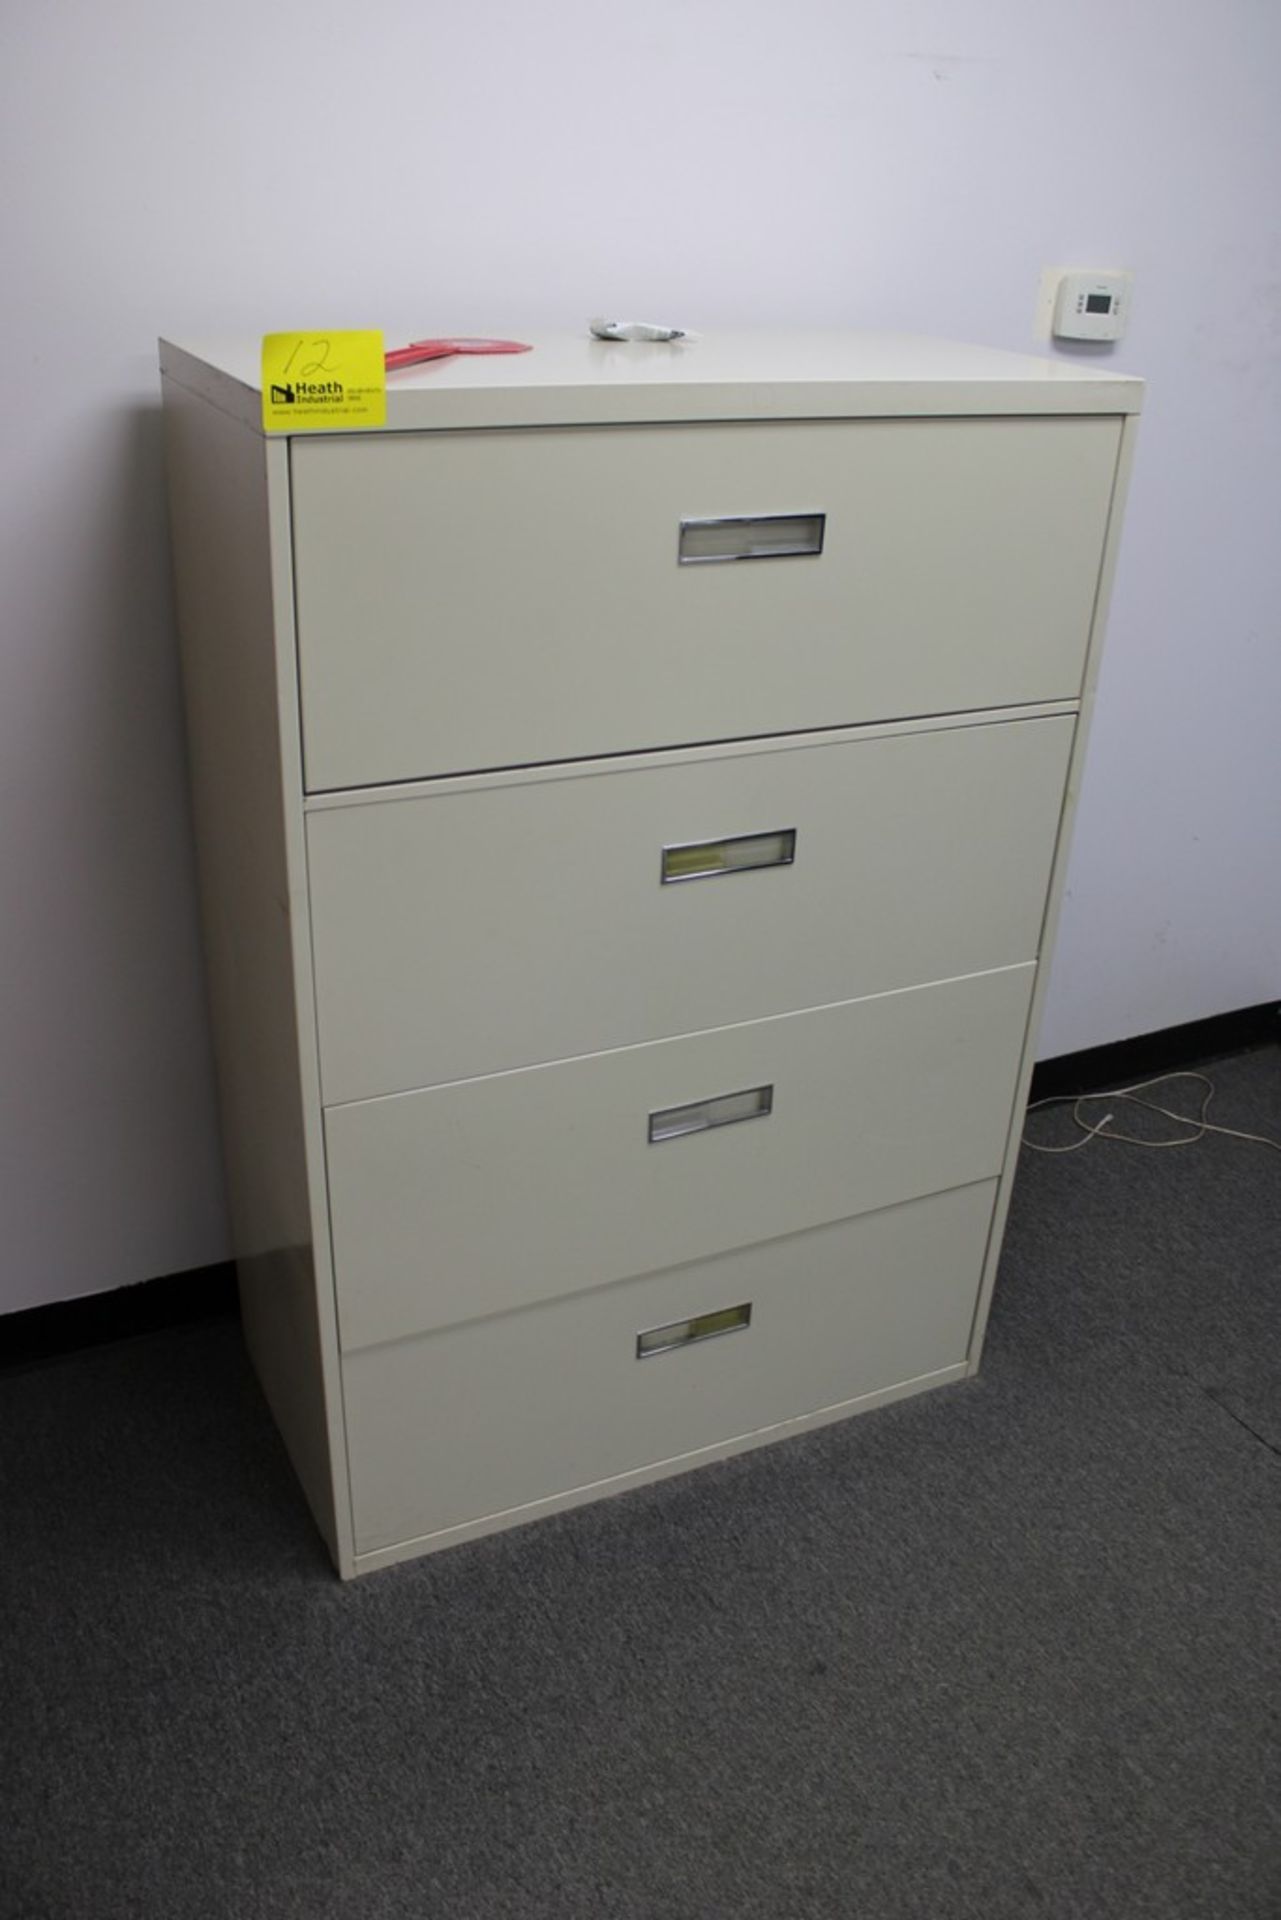 (2) FOUR DRAW LATERAL FILE CABINETS, 35" X 18" X 52" - Image 2 of 2